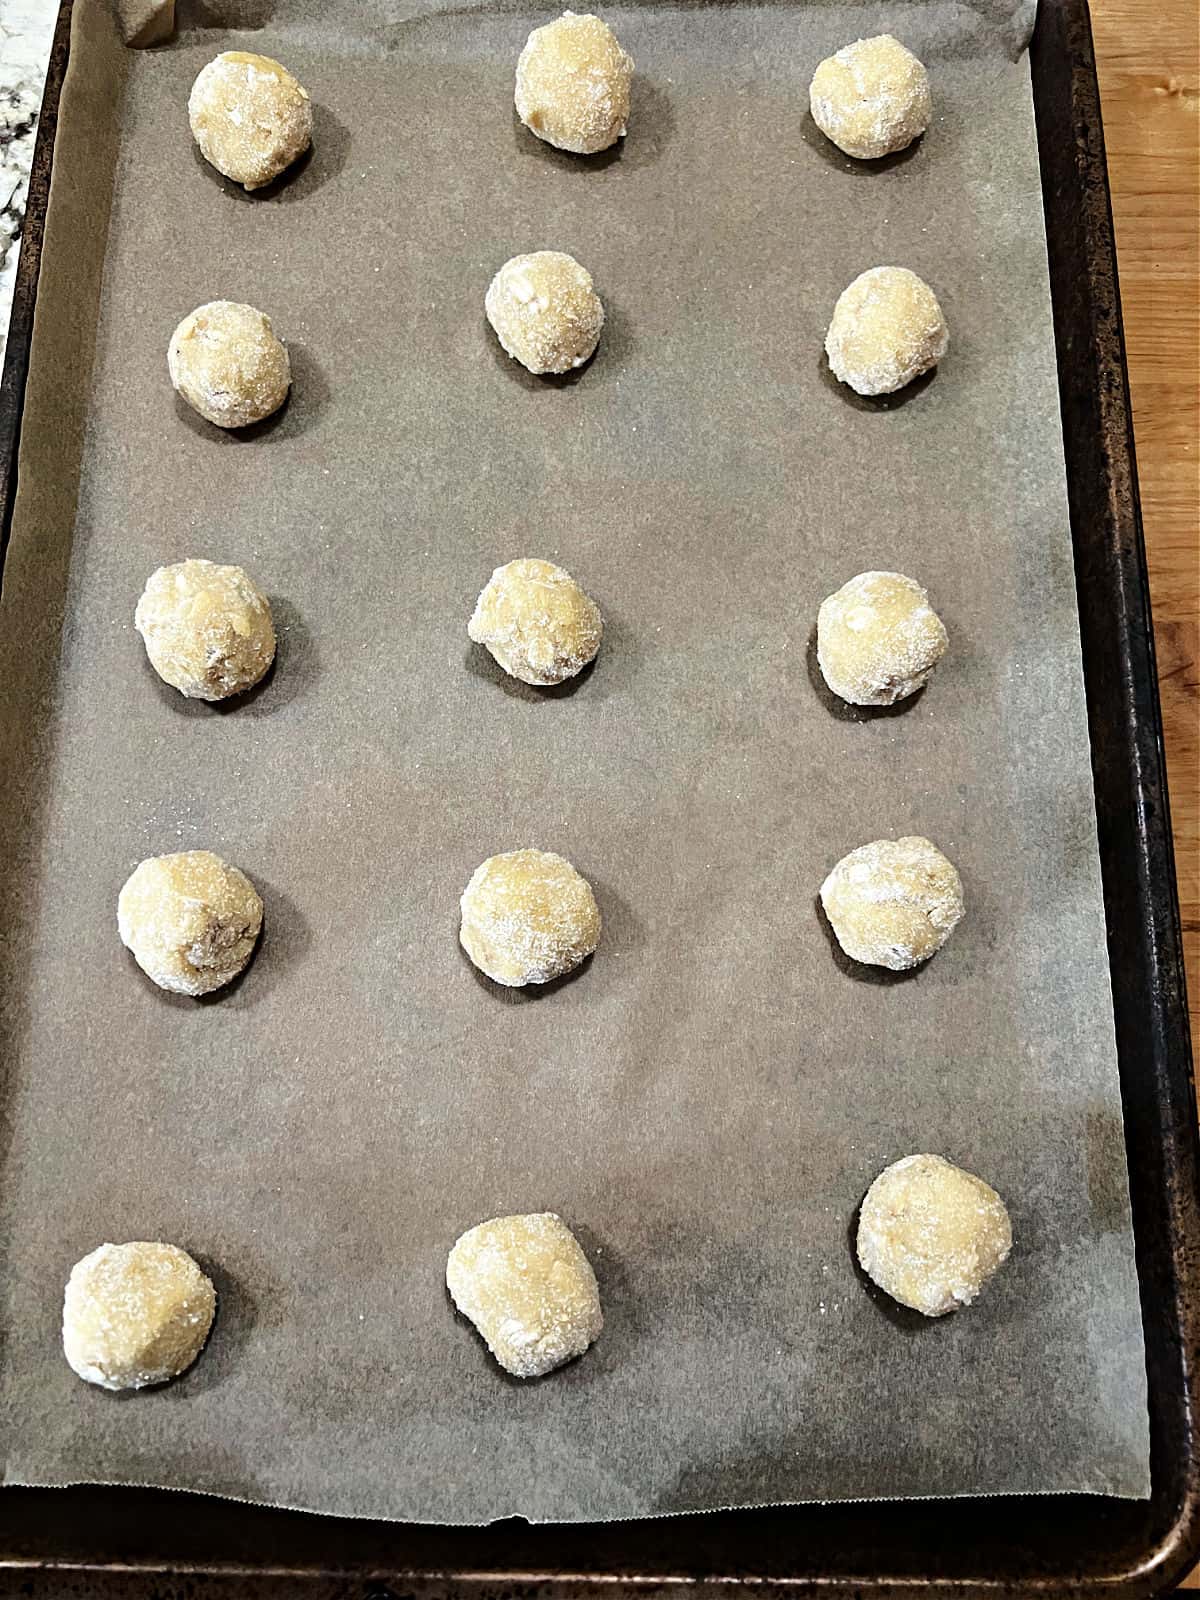 balls of dough lined up on a baking sheet.